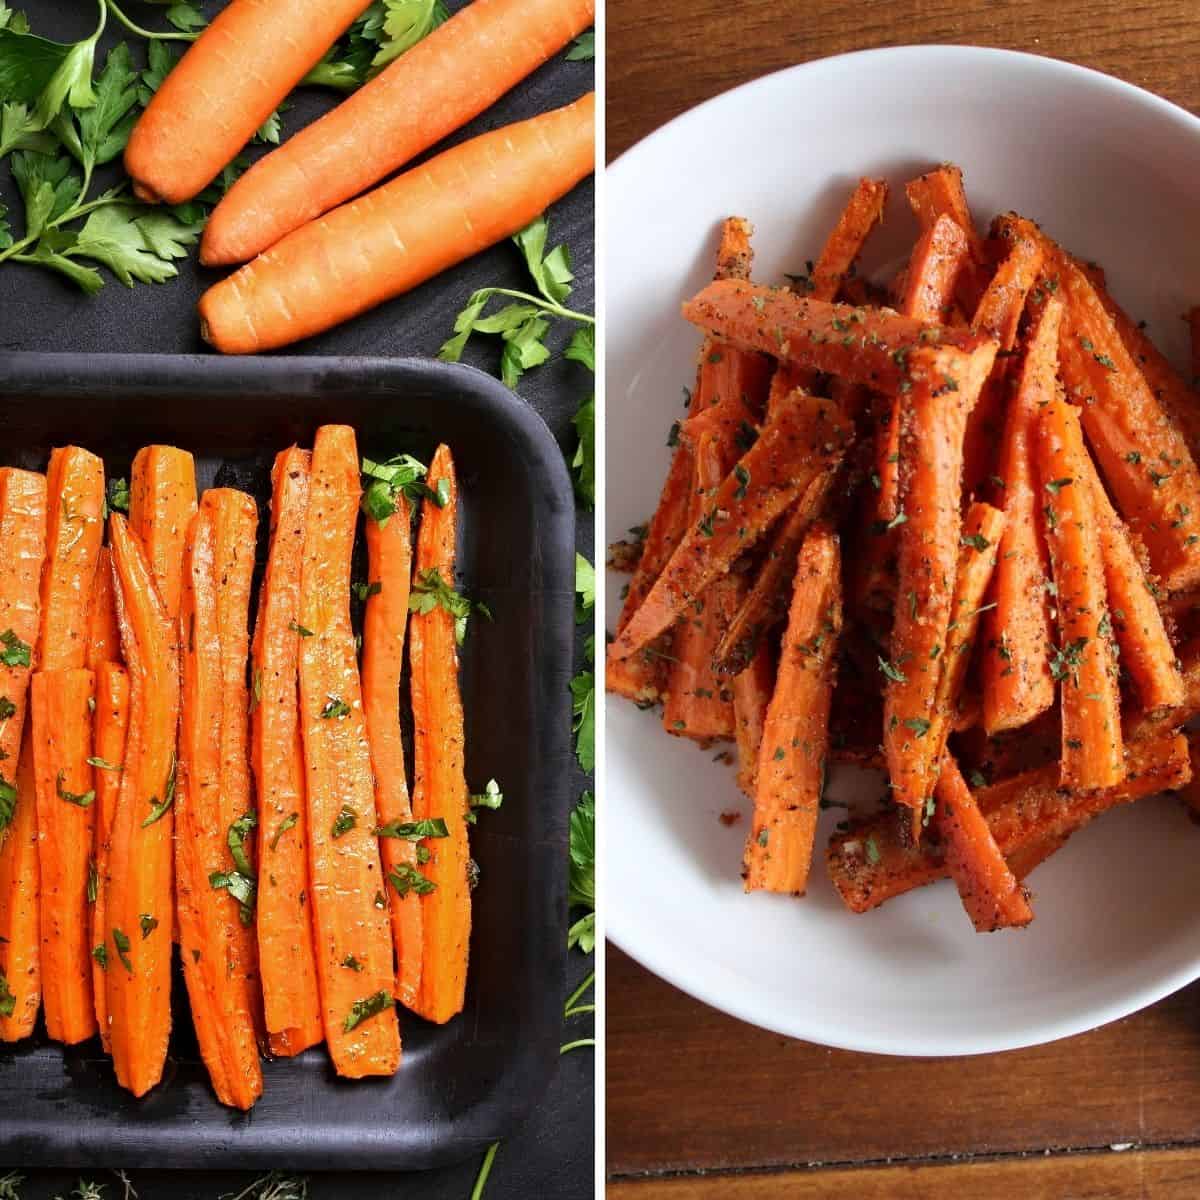 garlic parmesan carrots and glazed carrots in plates and bowls.